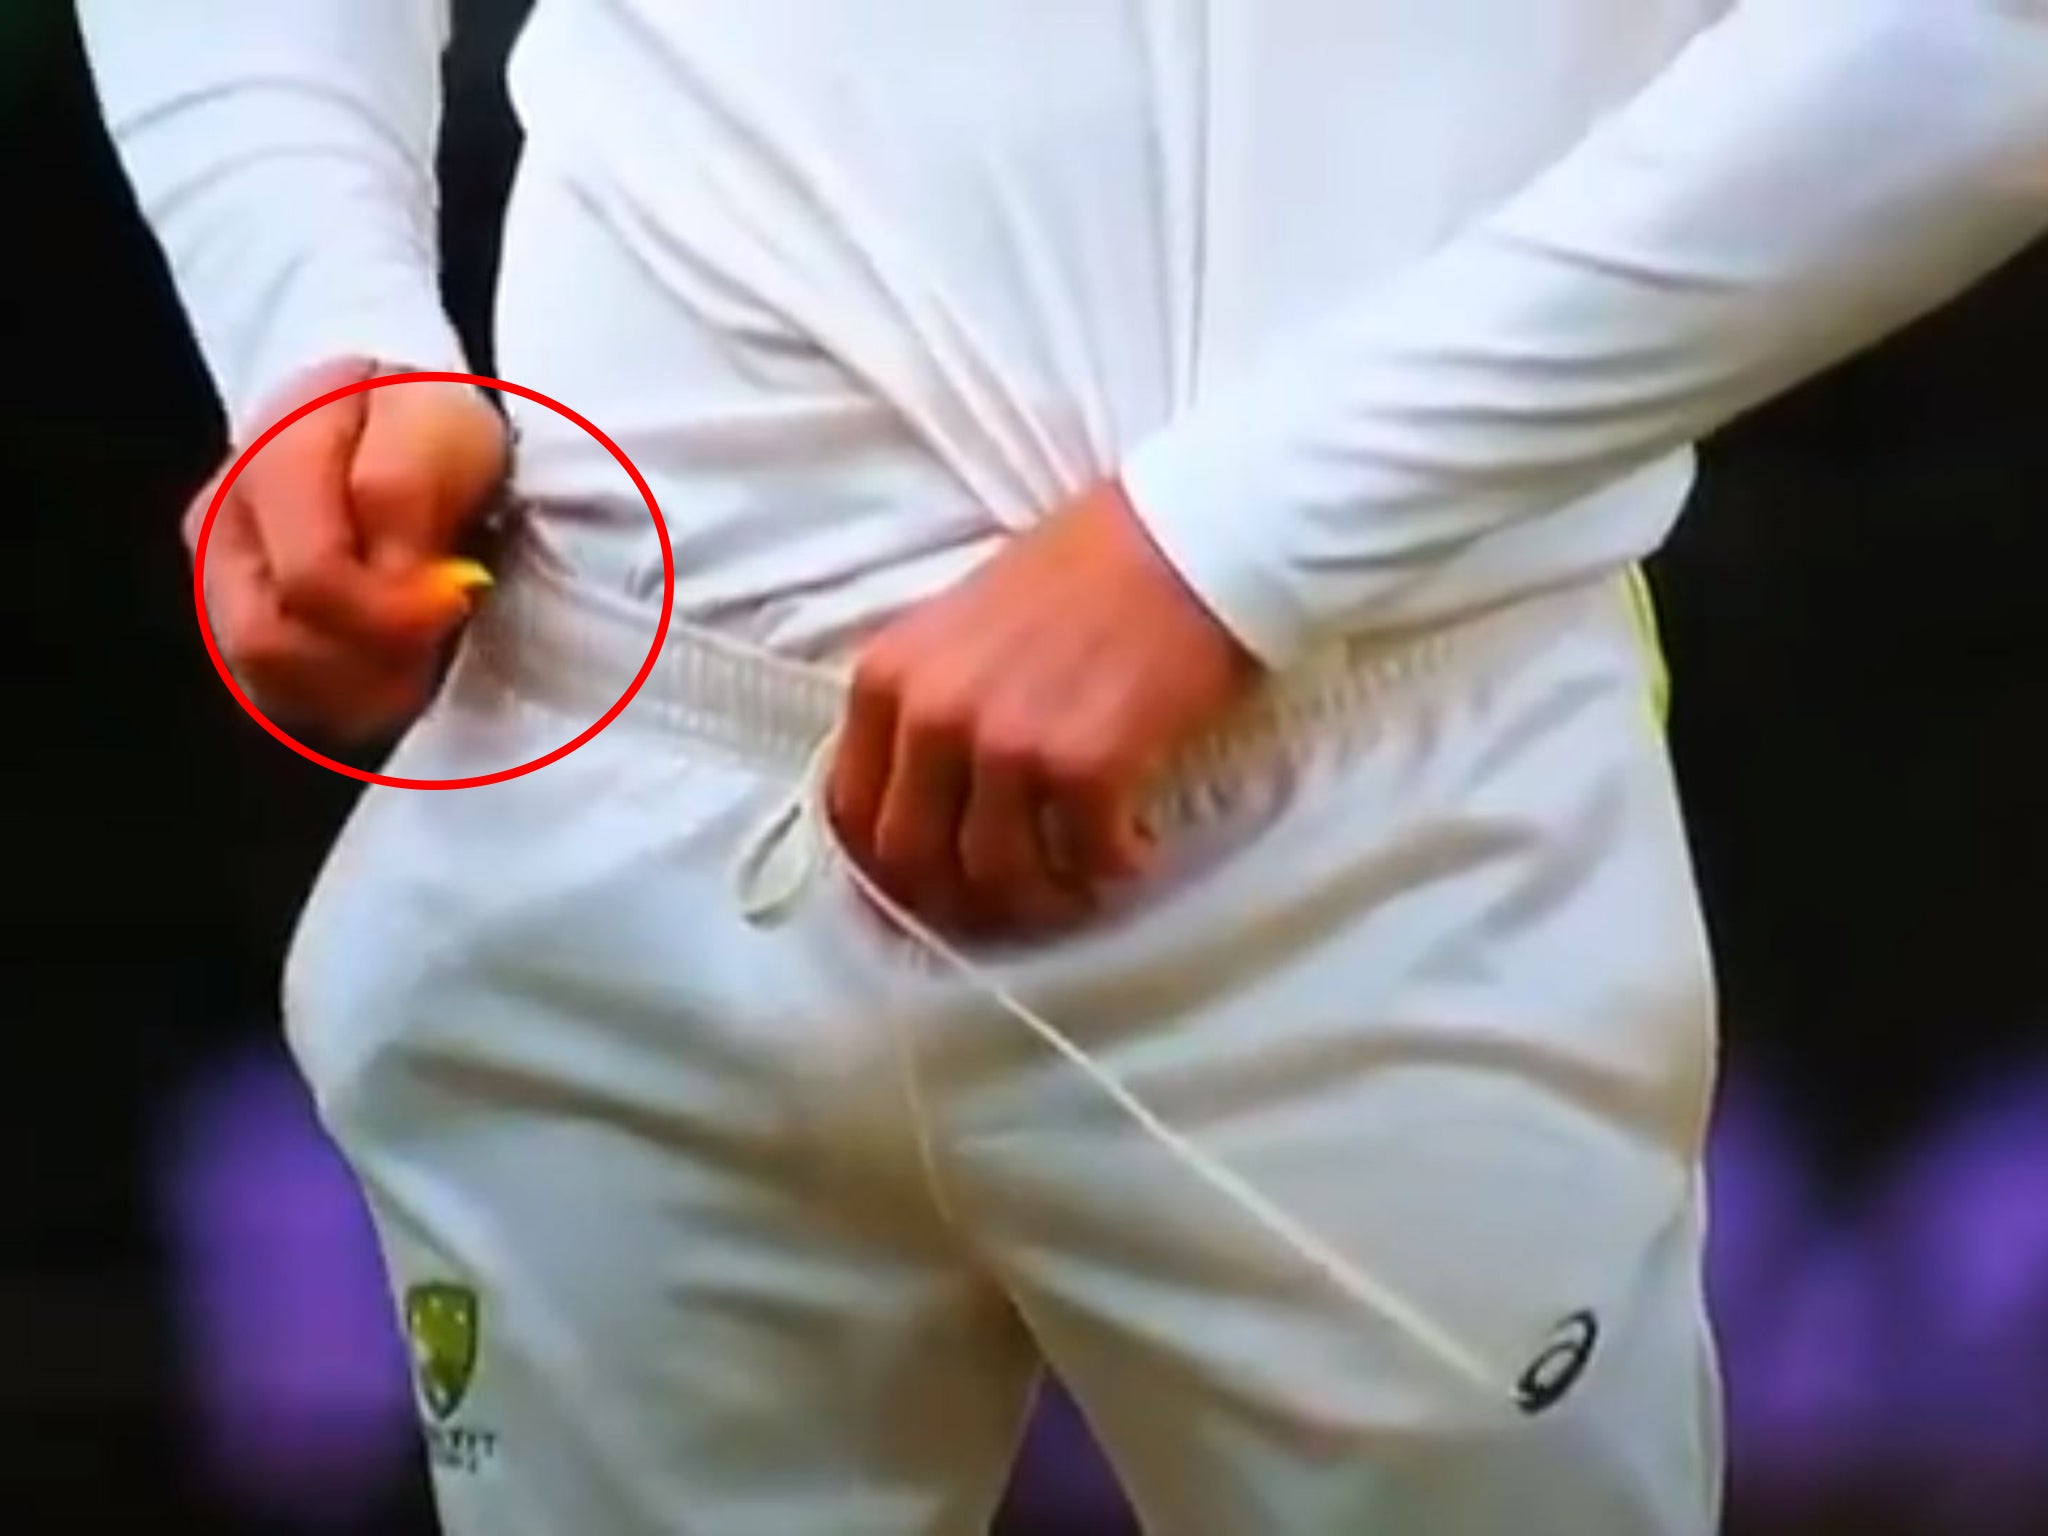 Cameron Bancroft appeared to produce an object from his trouser pocket while working on the ball